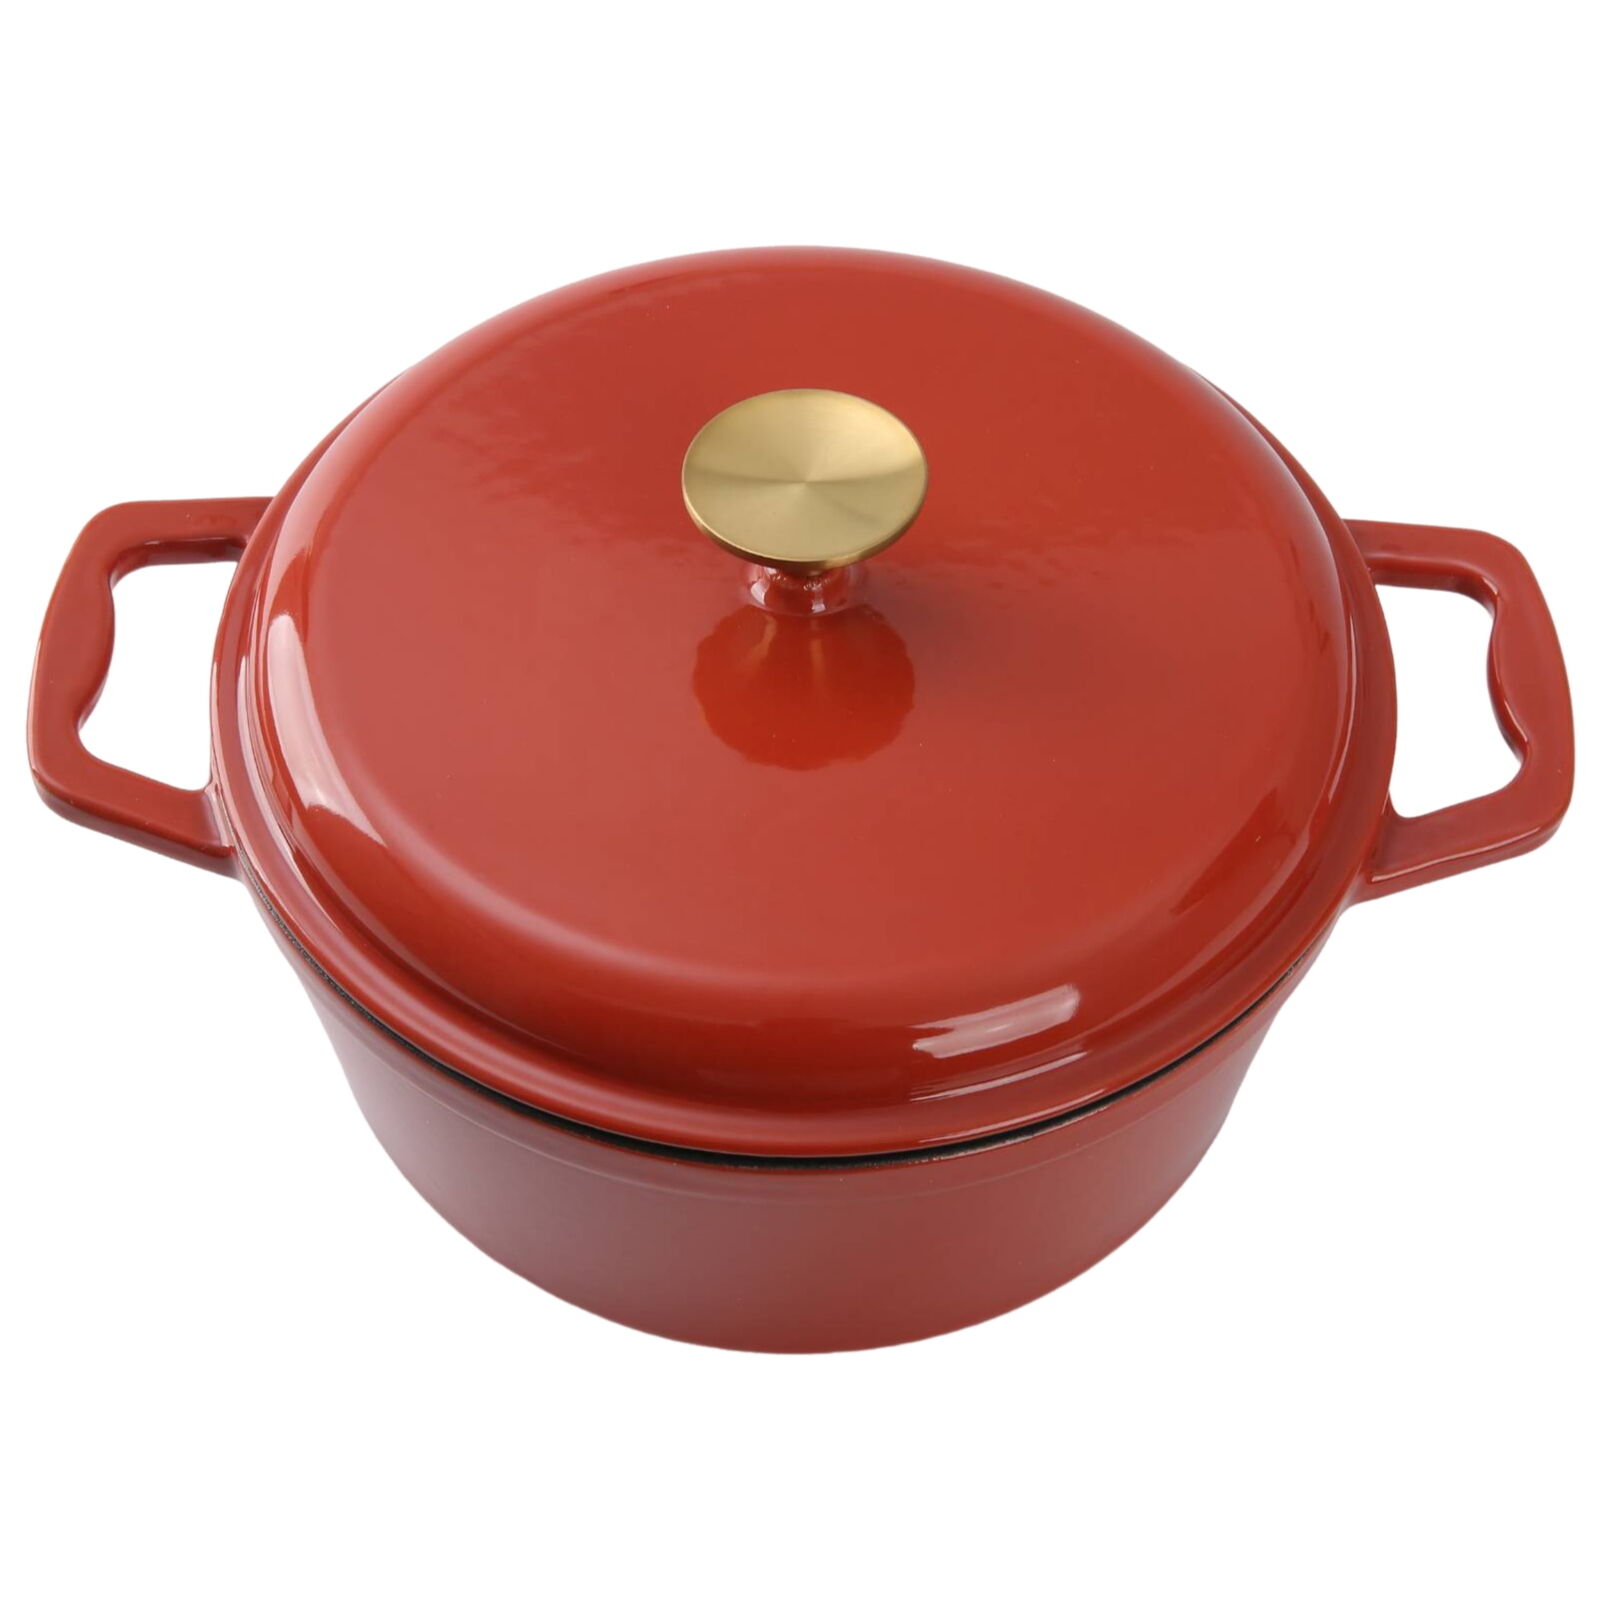 4.75qt Ceramic Enamel Cast Iron Dutch Oven Red with Lid